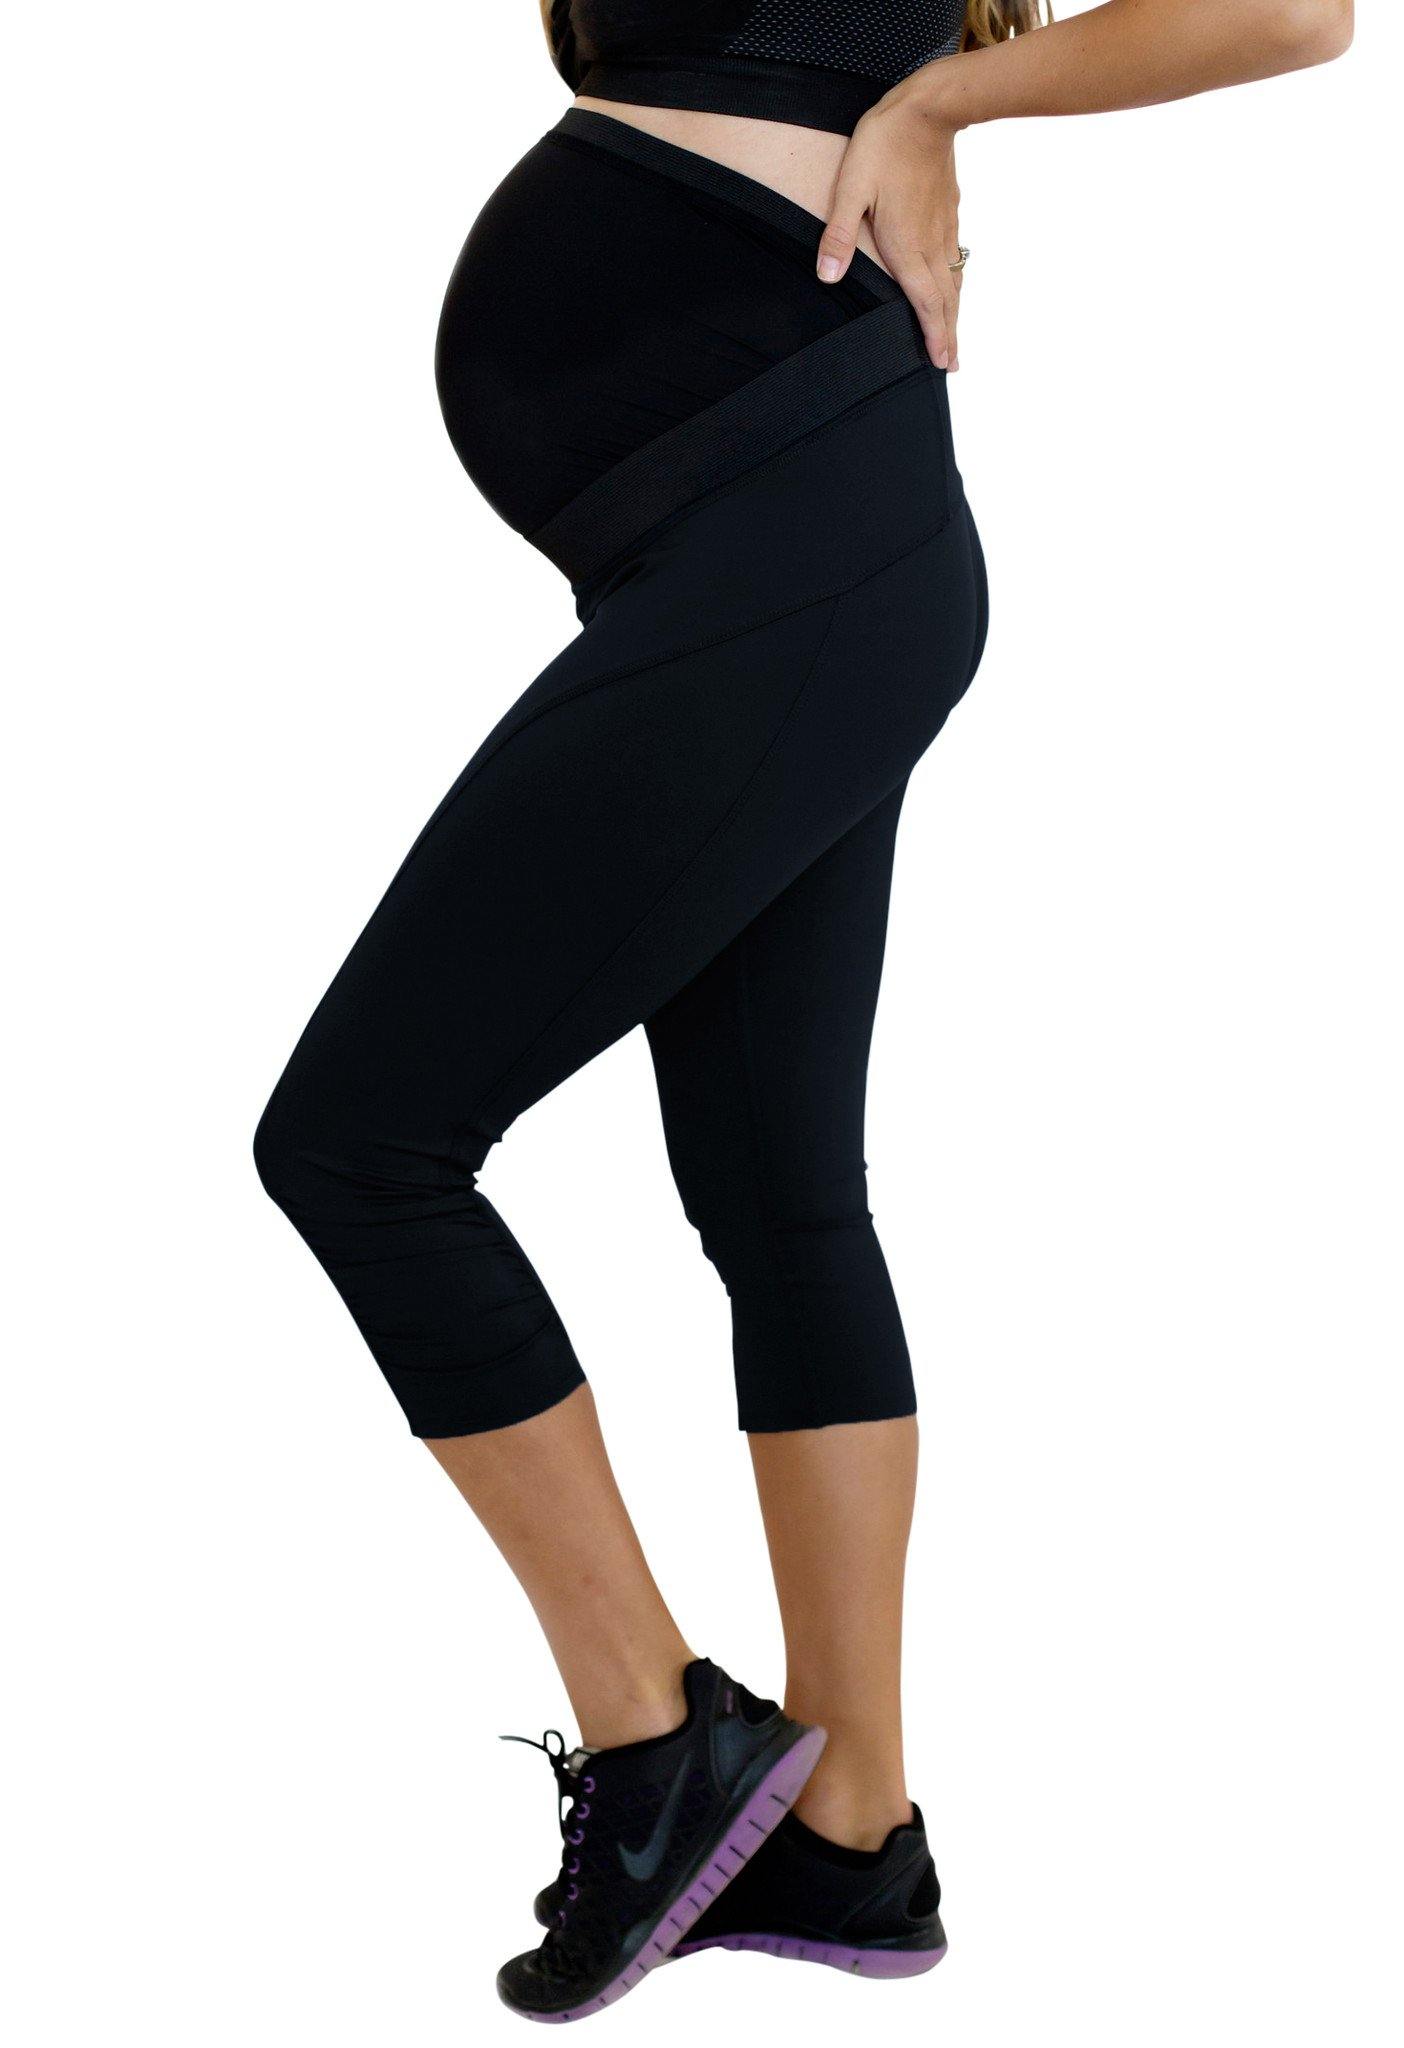 Move Maternity Capris Leggings with Pregnancy Belly Support - Mumberry